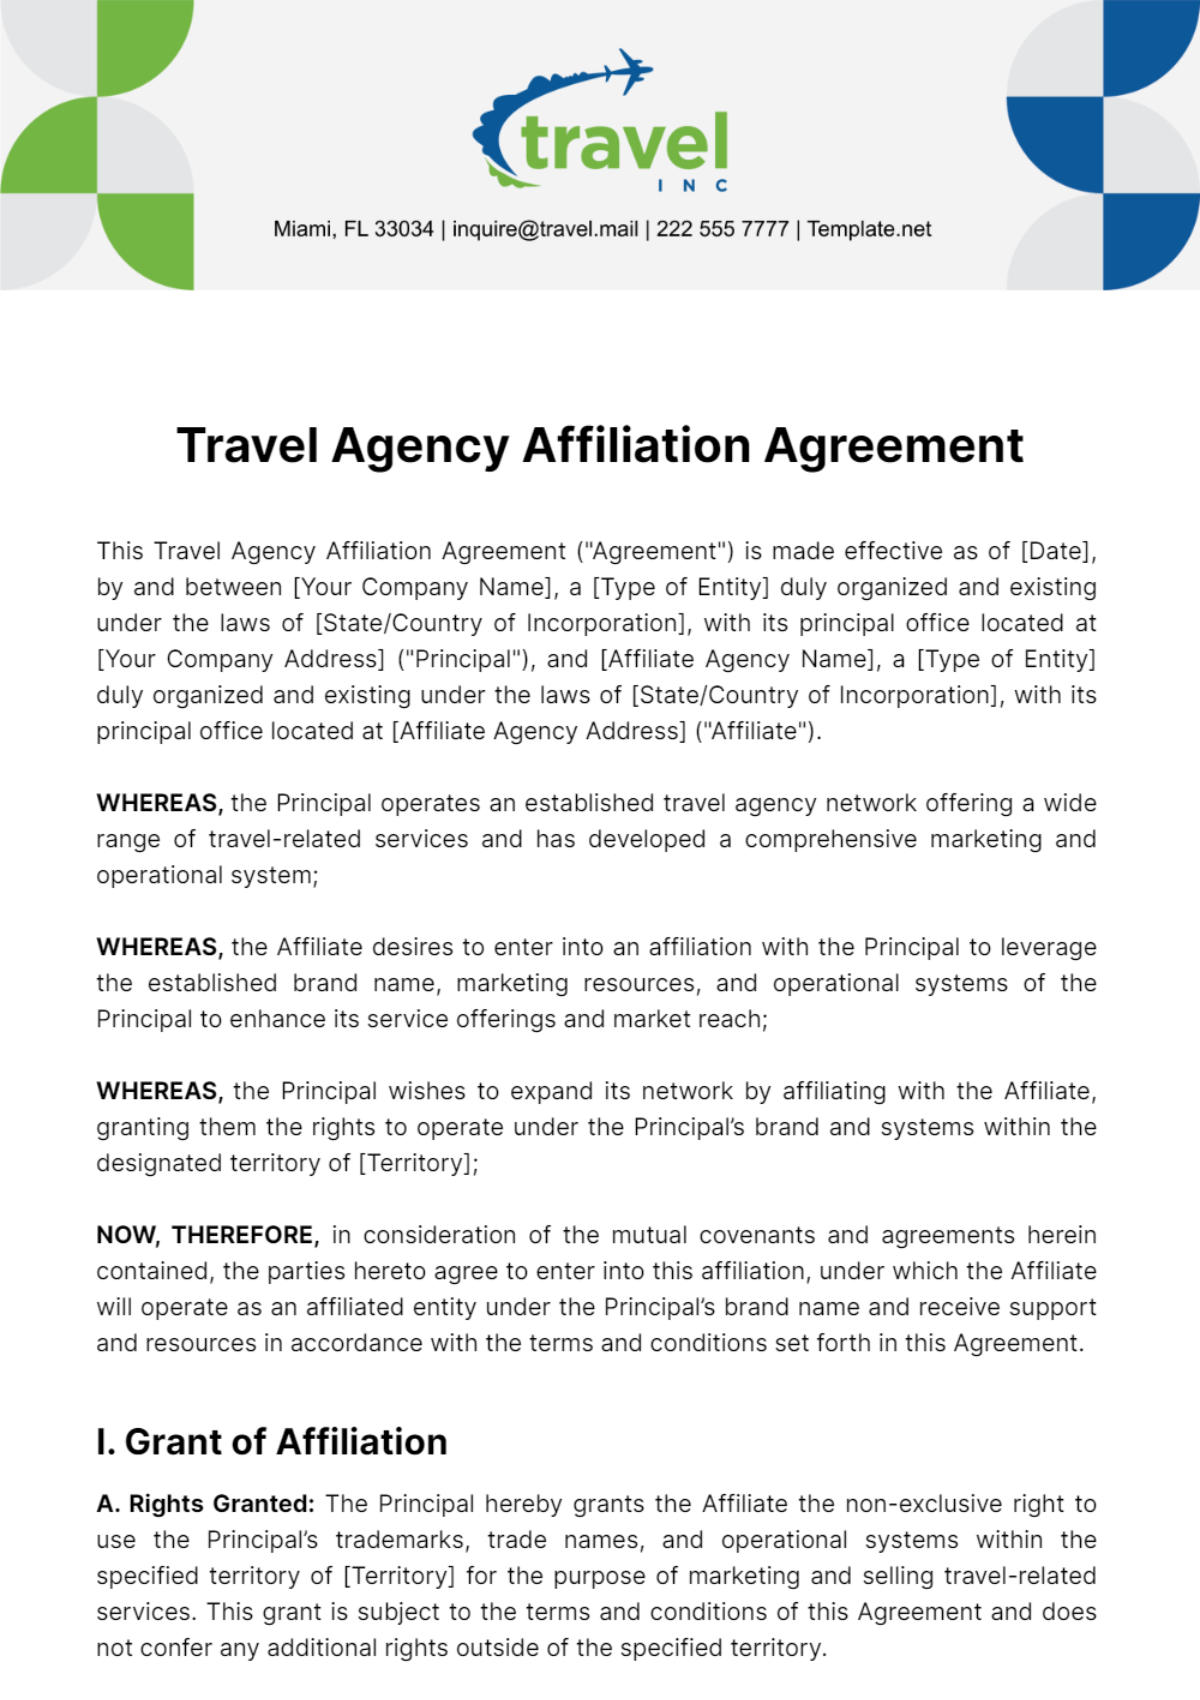 Free Travel Agency Affiliation Agreement Template